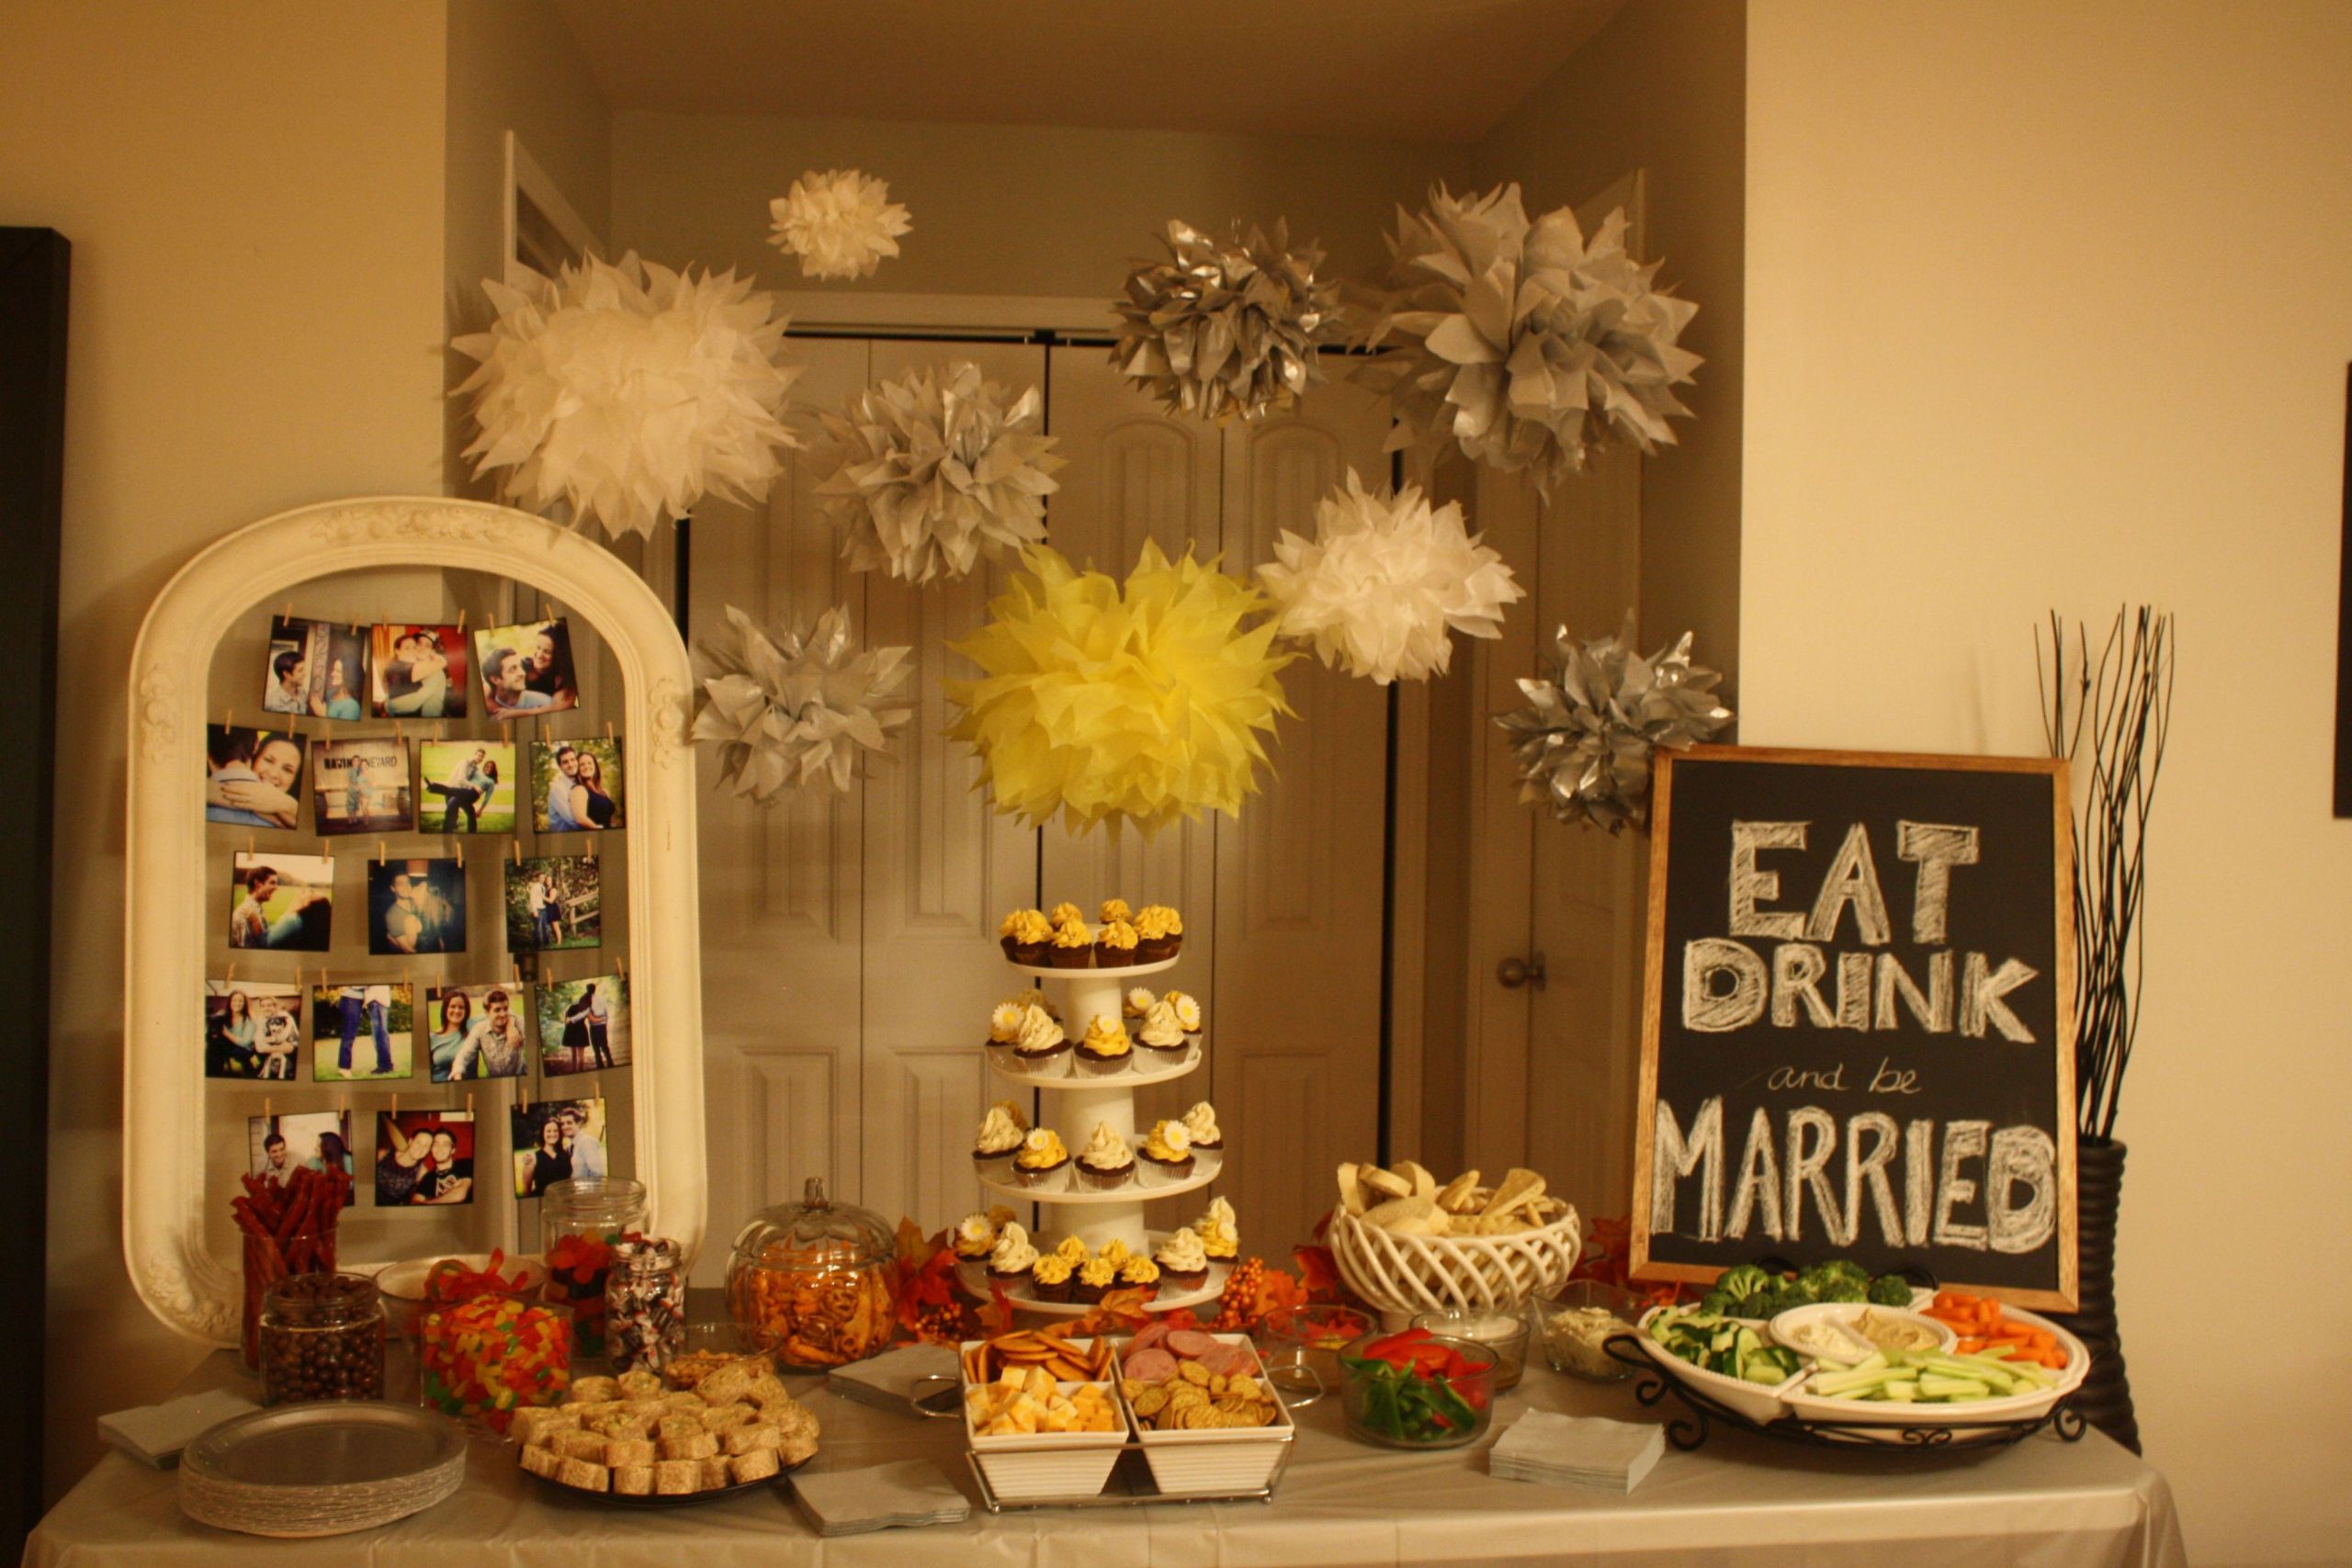 Engagement Party Ideas Diy
 Engagement Party Decorations My Pinterest inspired DIY